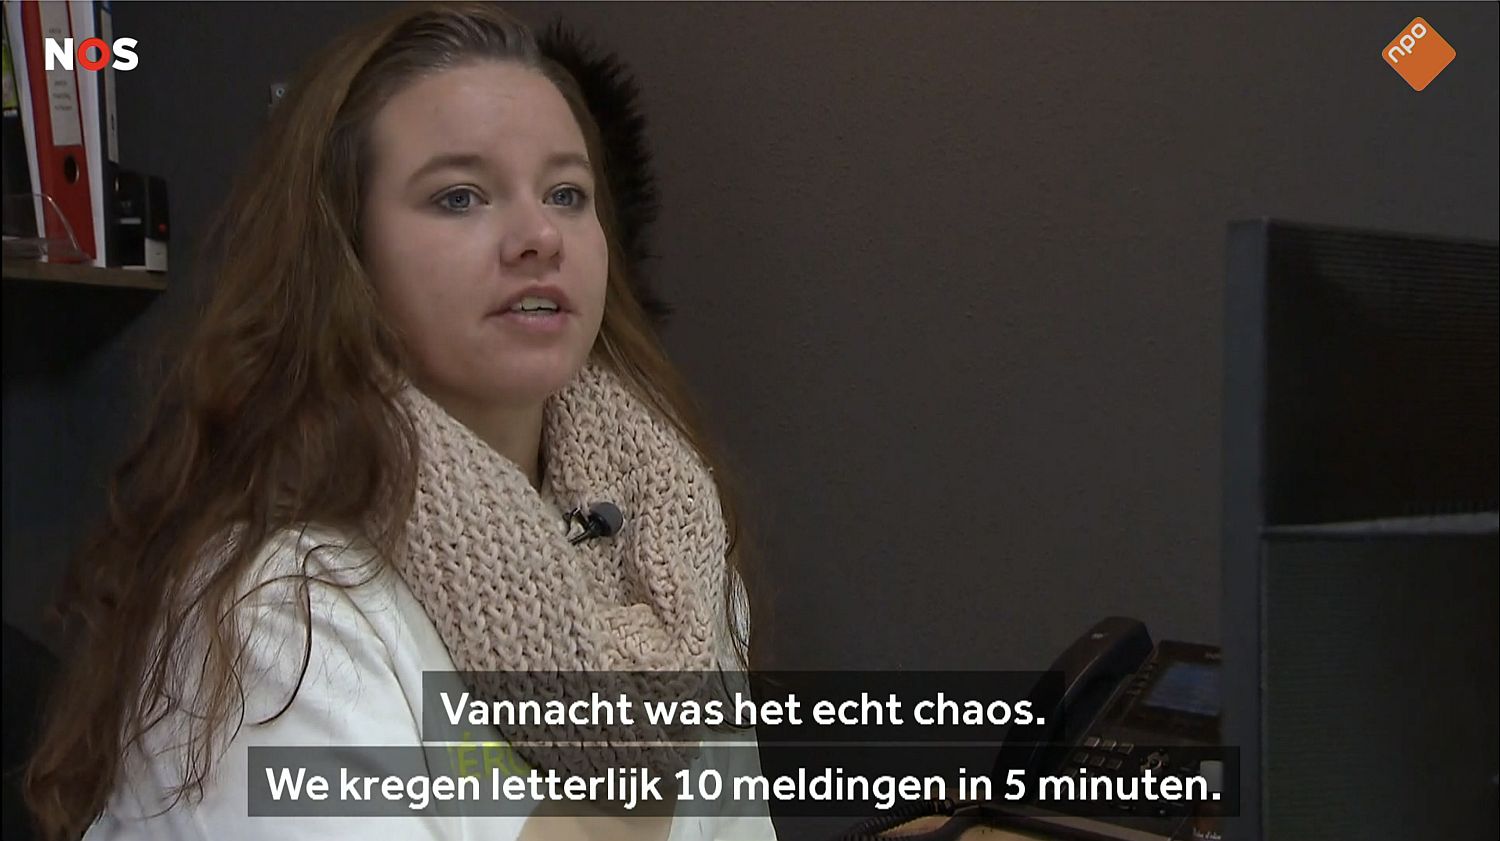 Elise van der Graaf of Roos-Autoberging.nl takes questions from the press about the exceptional spike in callouts the previous evening. 'It was really chaotic overnight. We literally had 10 incident reports every 5 minutes'.